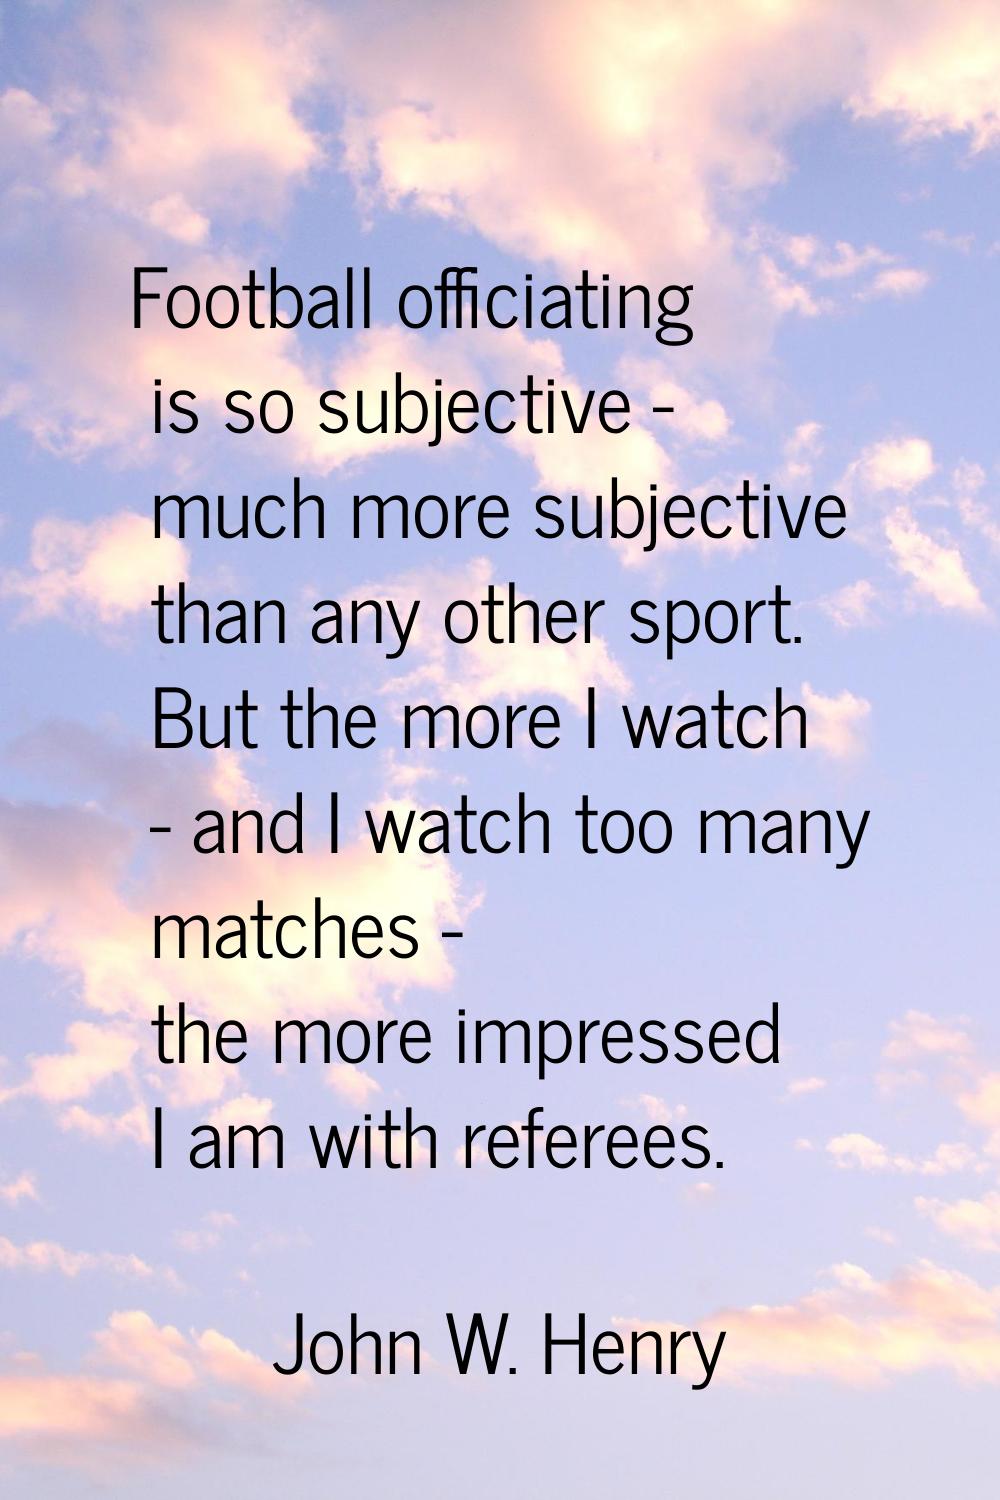 Football officiating is so subjective - much more subjective than any other sport. But the more I w